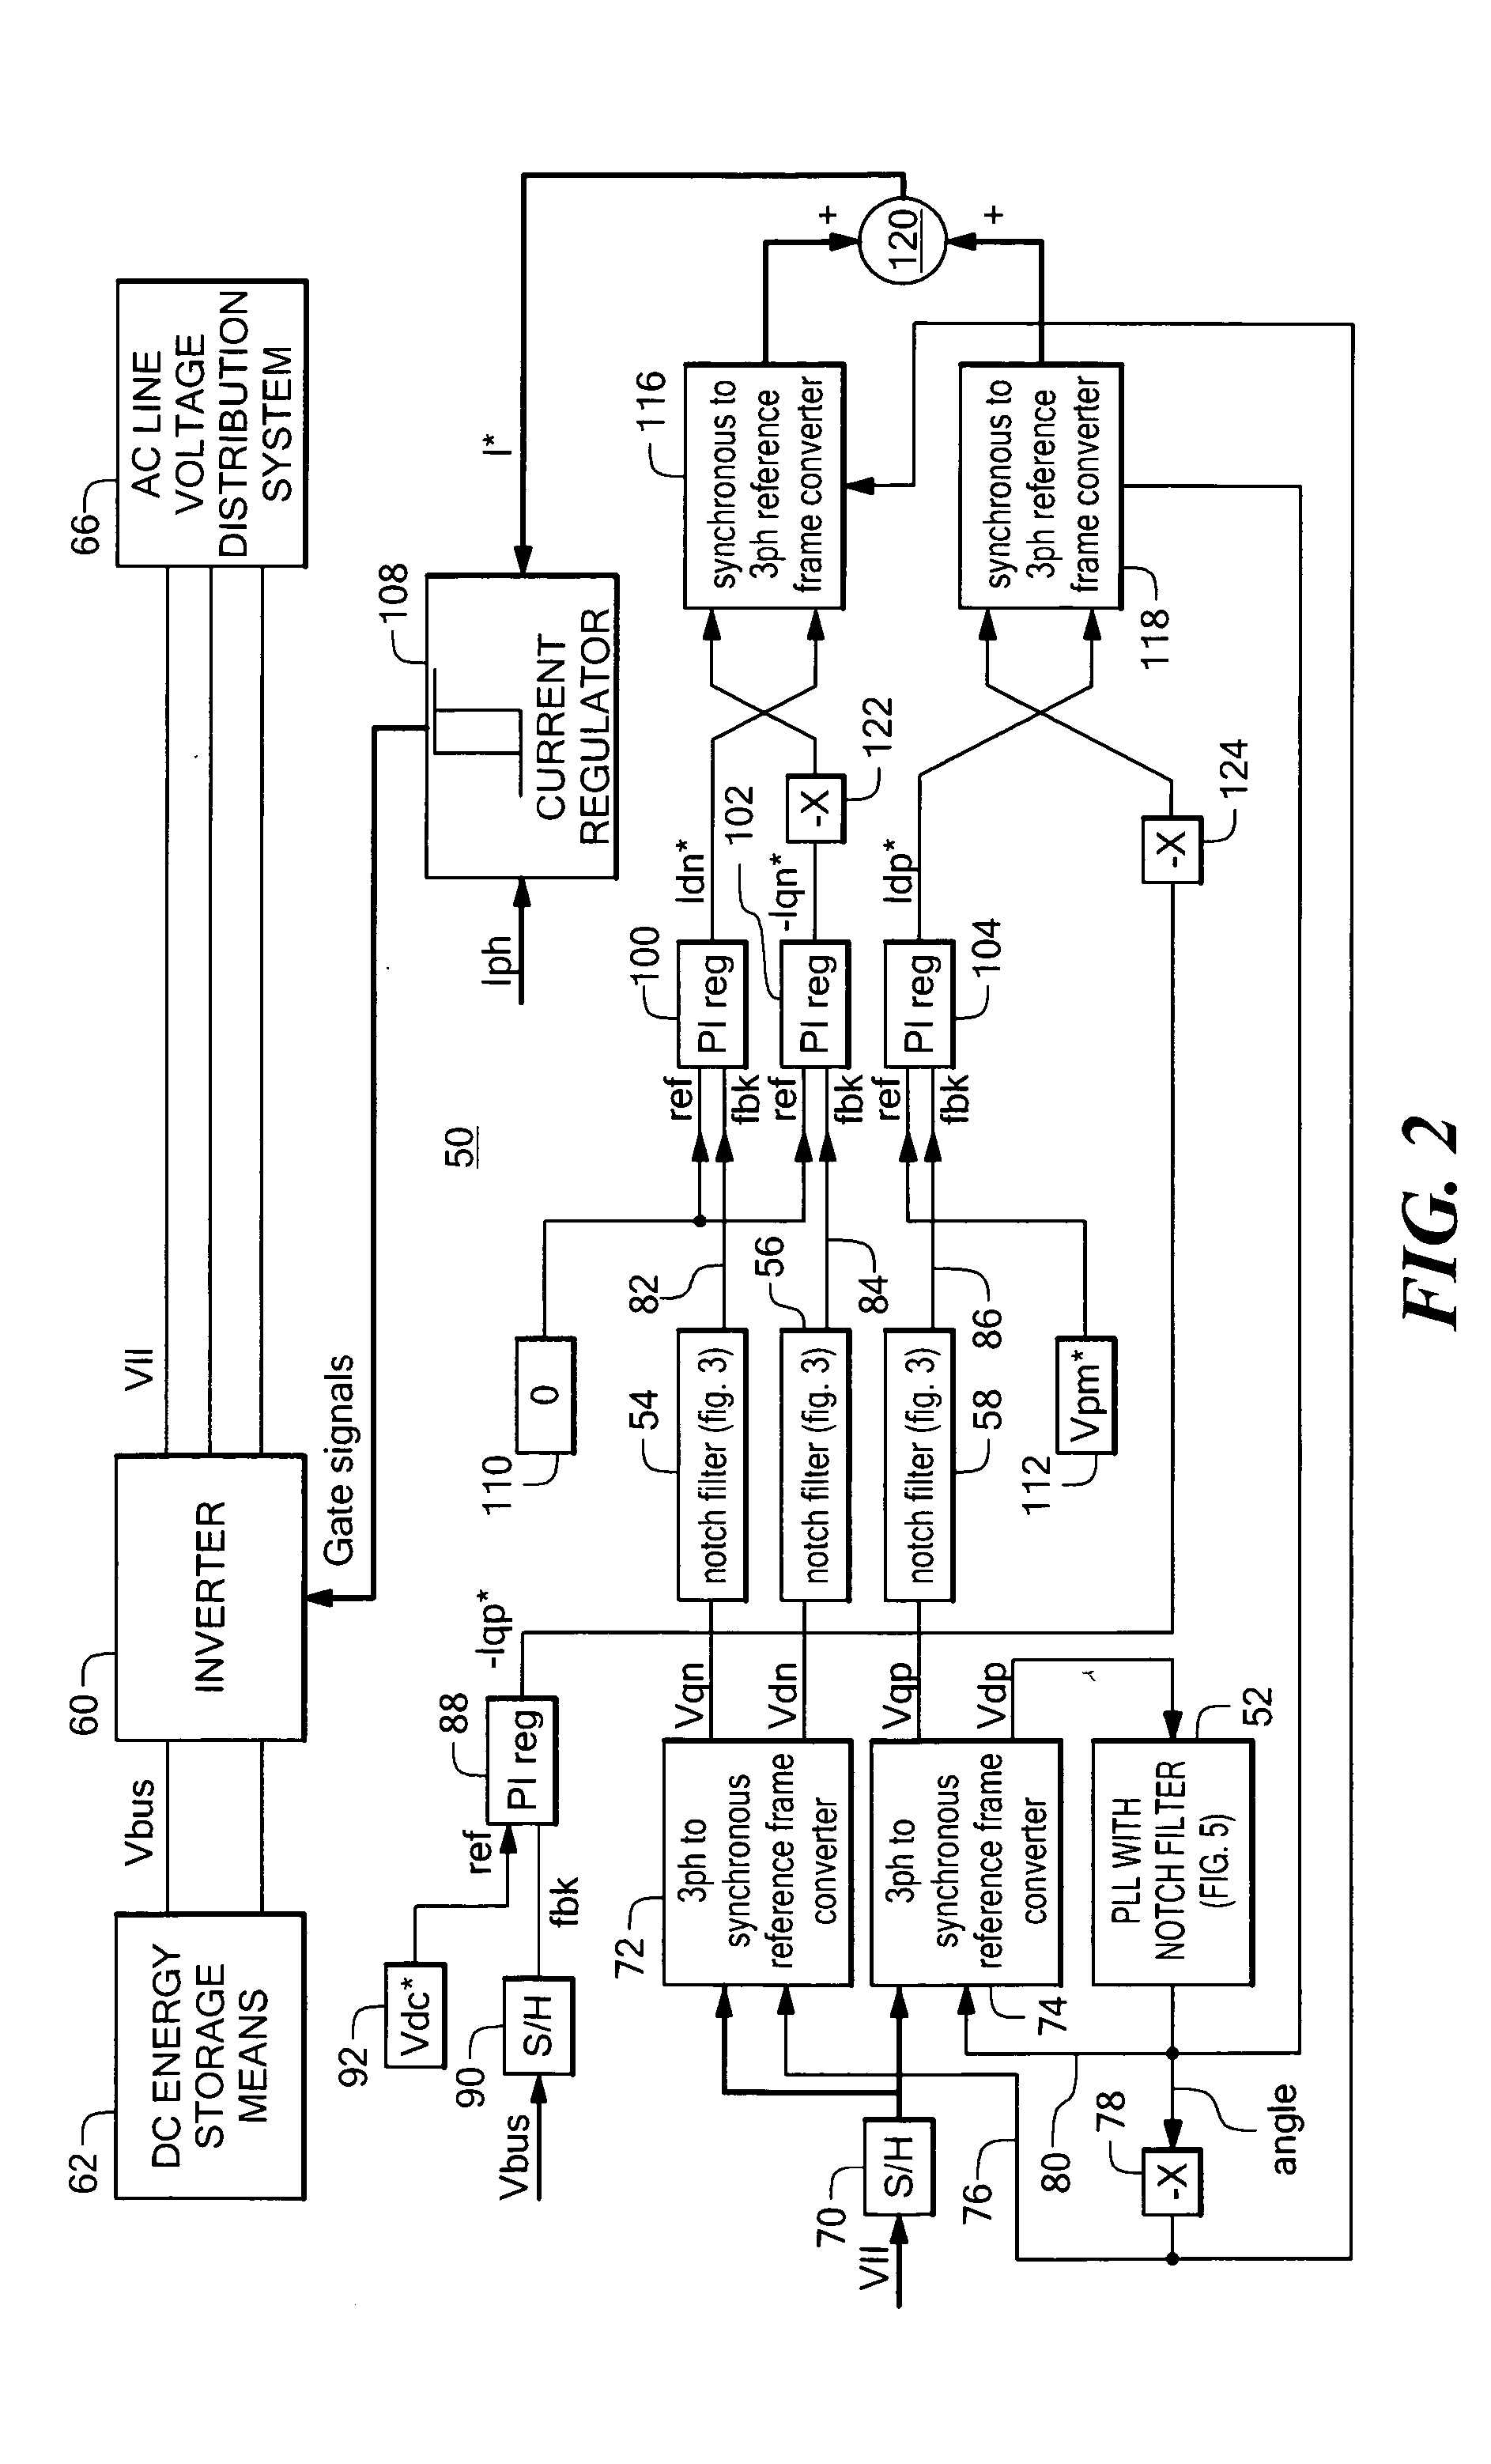 Power system having a phase locked loop with a notch filter